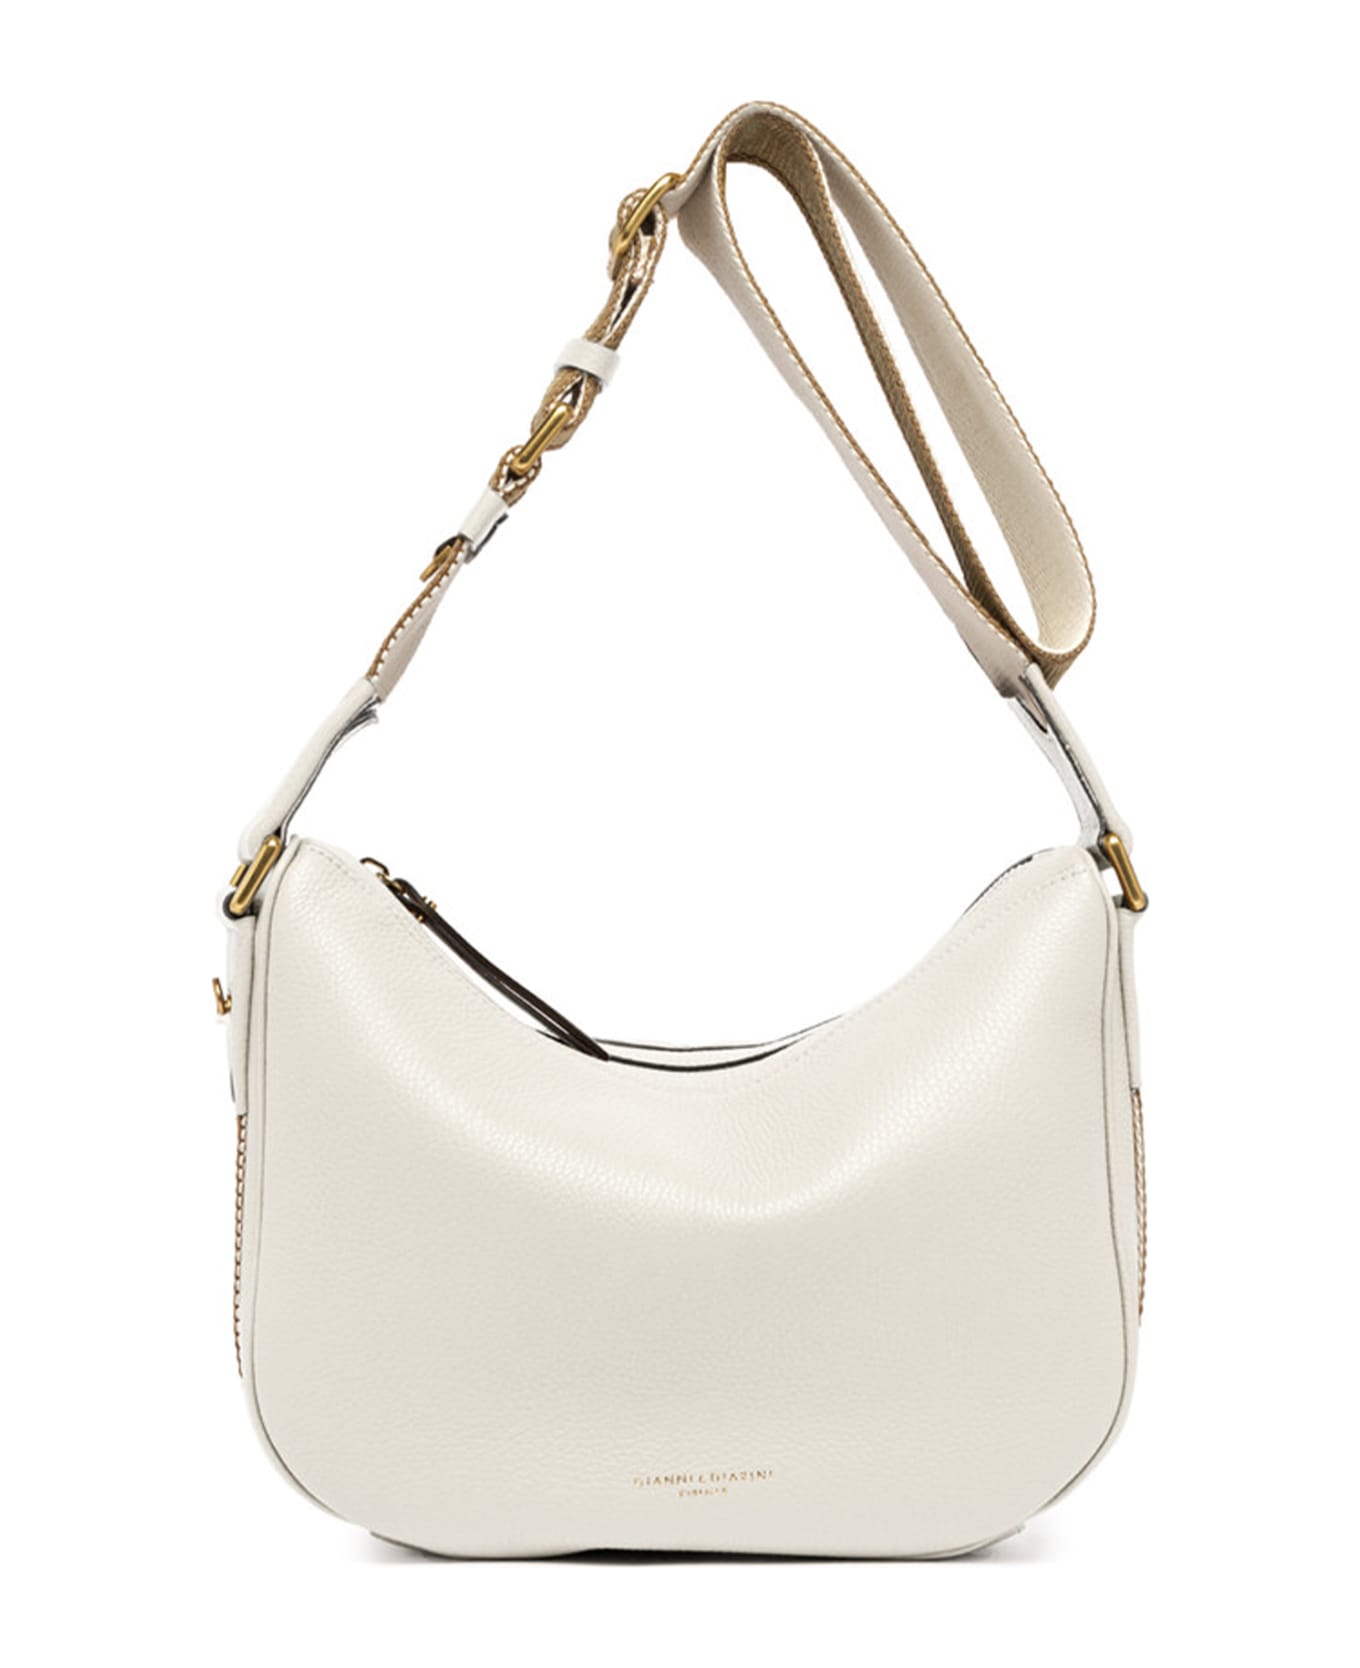 Gianni Chiarini Armonia Shoulder Bag In Hammered Leather - MARBLE